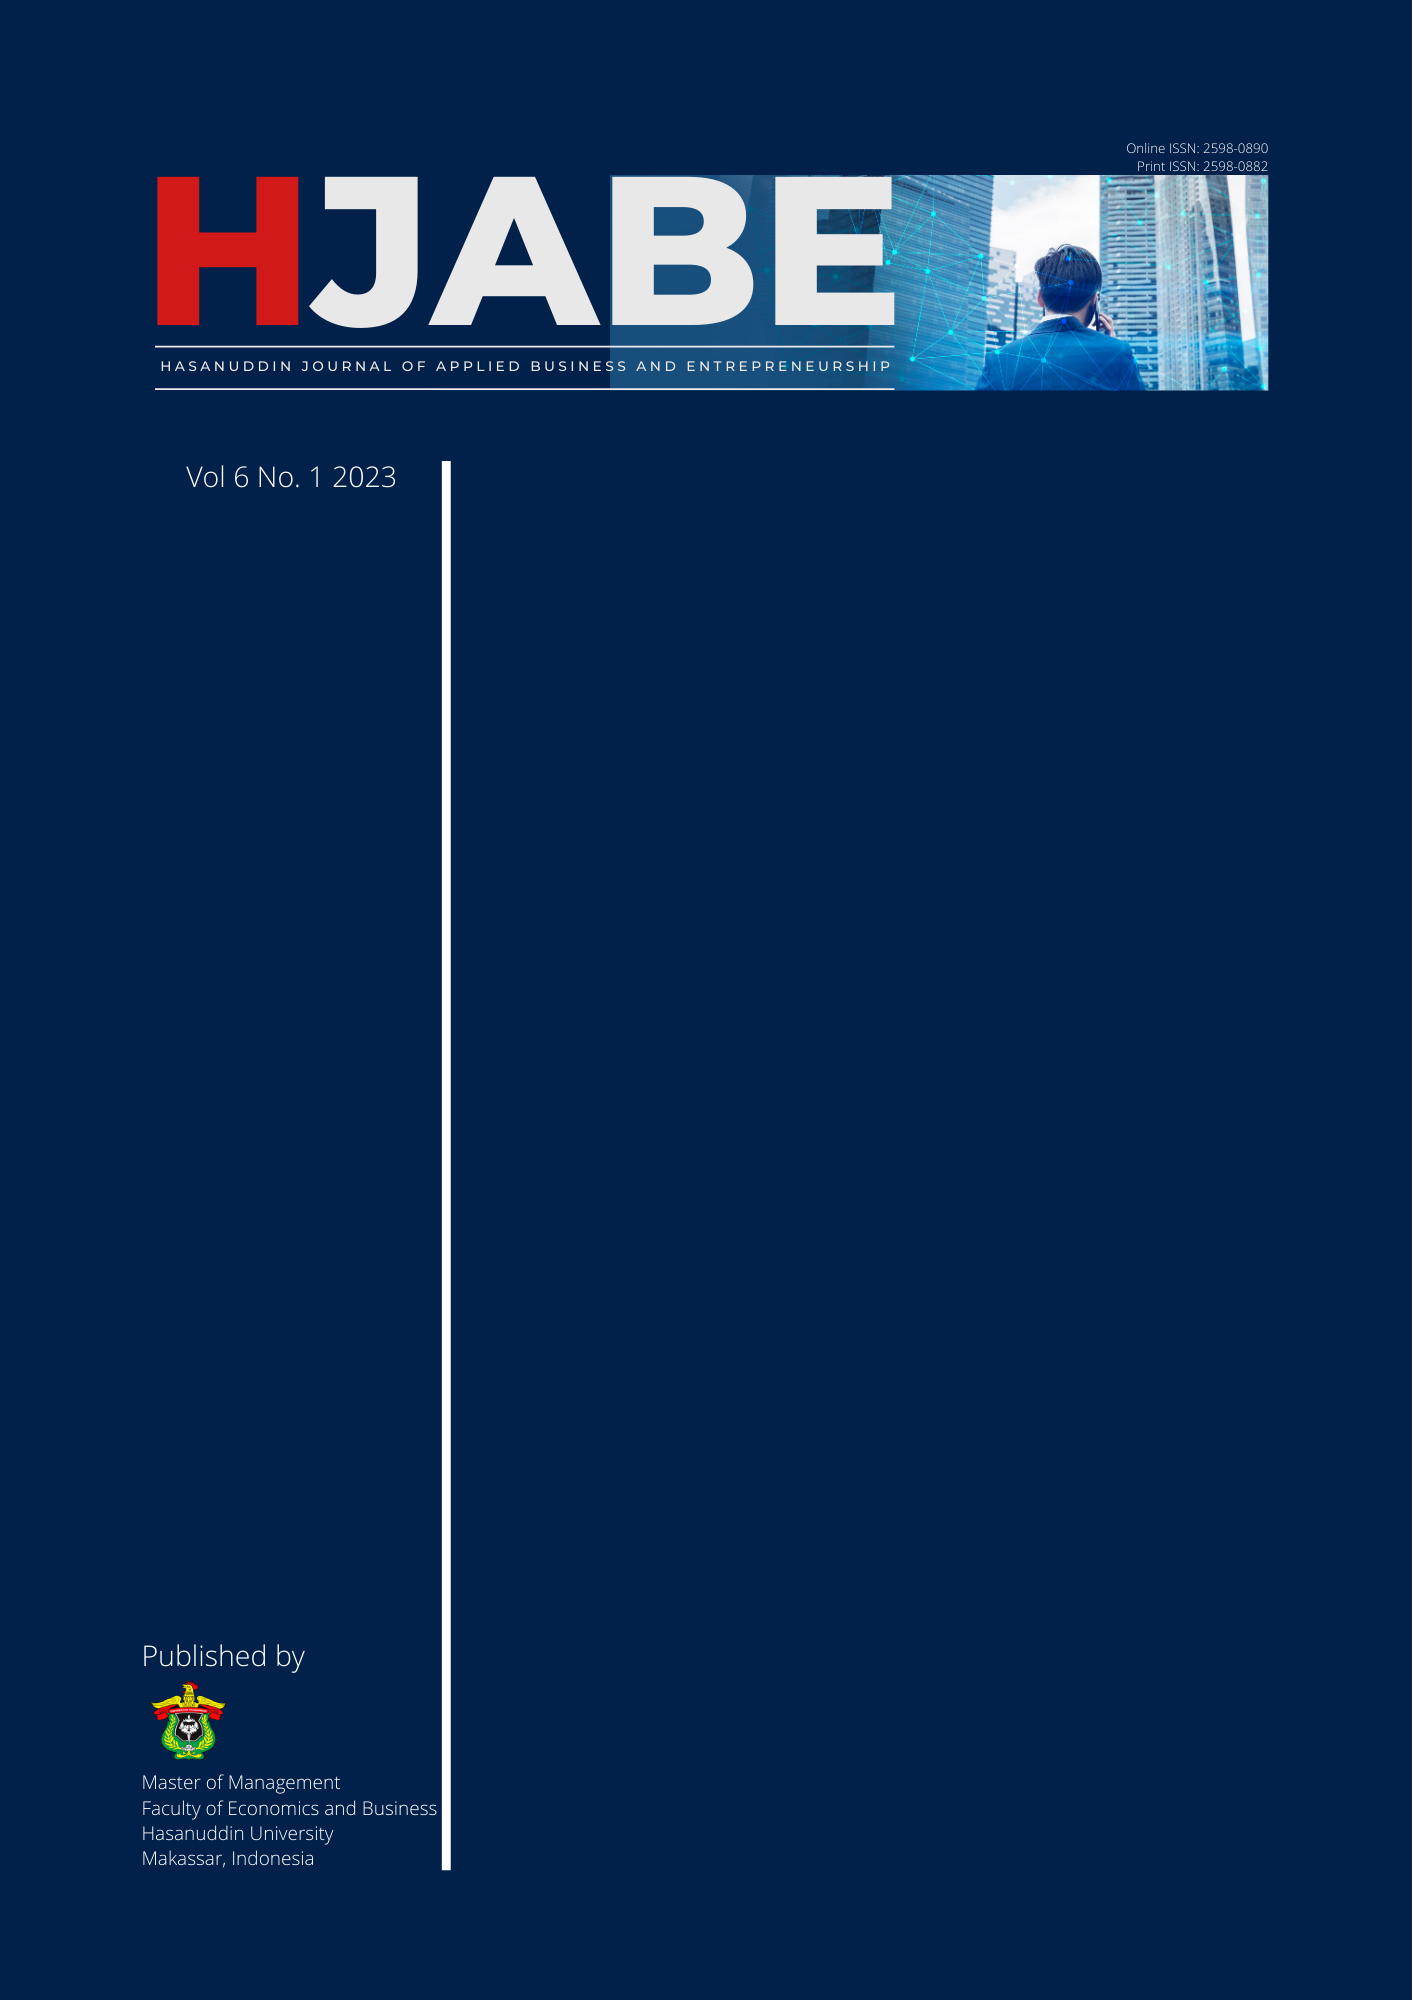 					View Vol. 6 No. 1 (2023): Hasanuddin Journal of Applied Business and Entrepreneurship
				